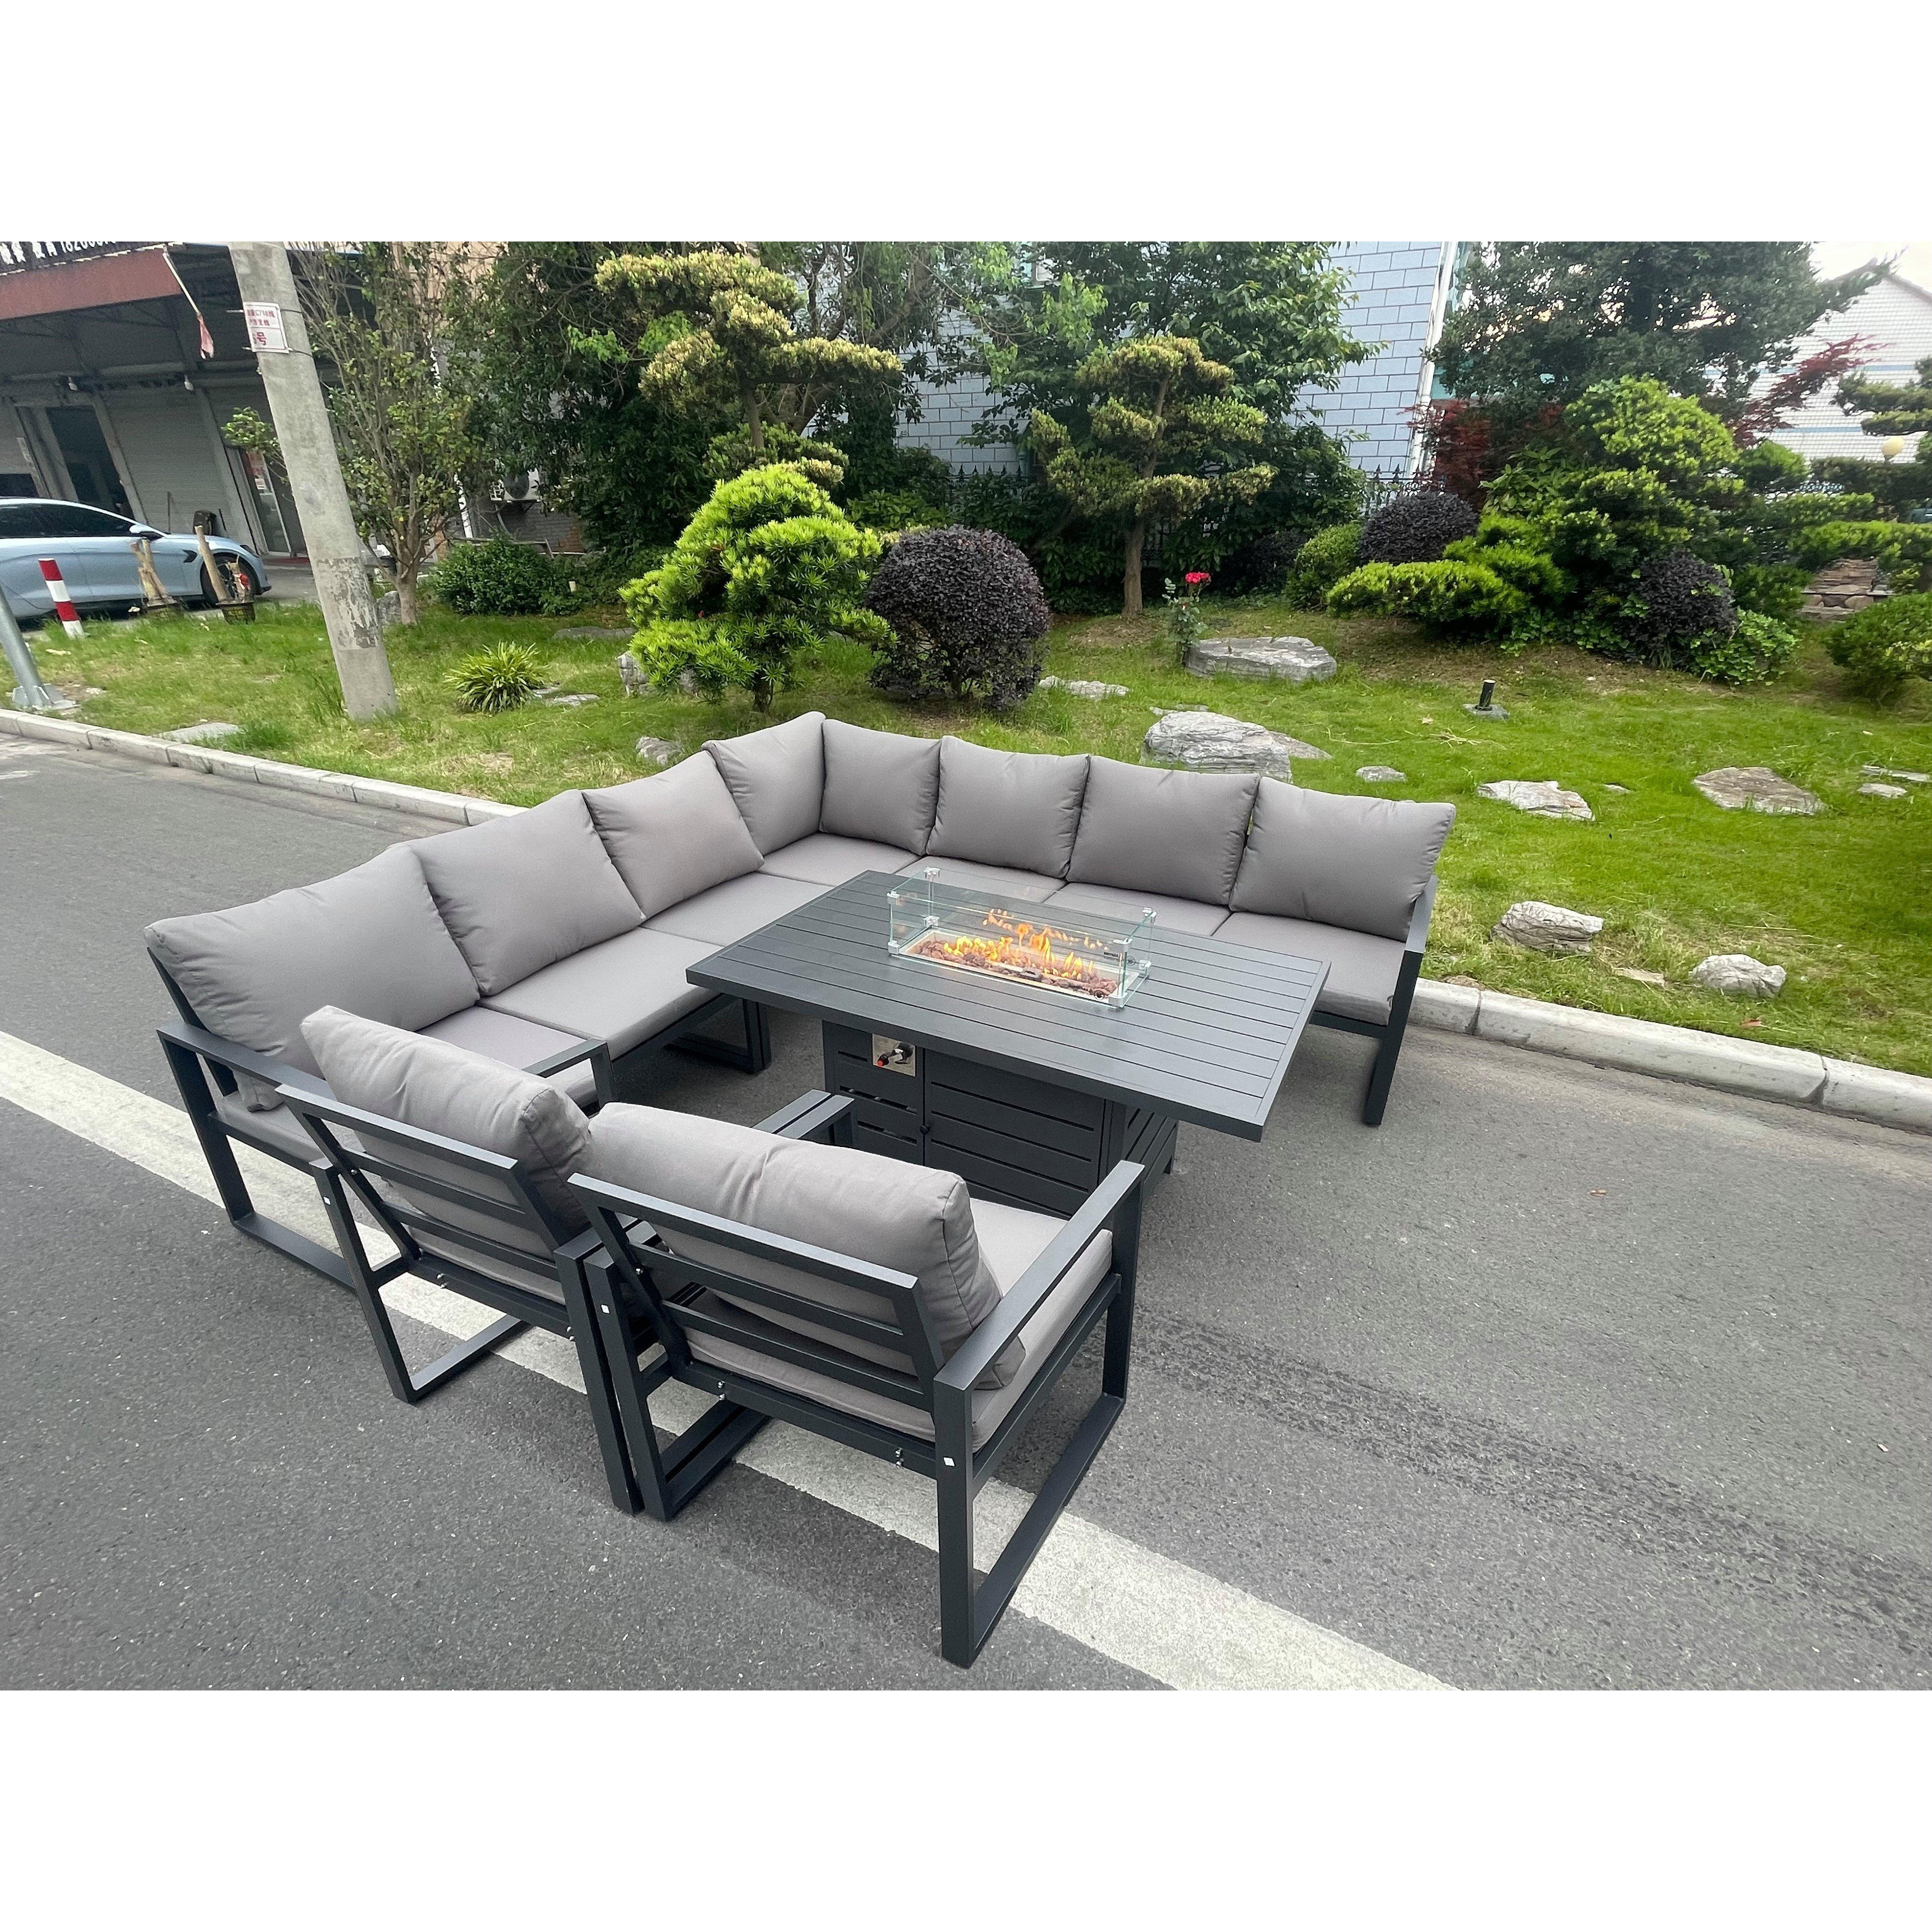 Aluminium 8 Pieces Garden Furniture Corner Sofa Set with Cushions Gas Fire Pit Dining Table Set with 2 Chairs Dark Grey - image 1